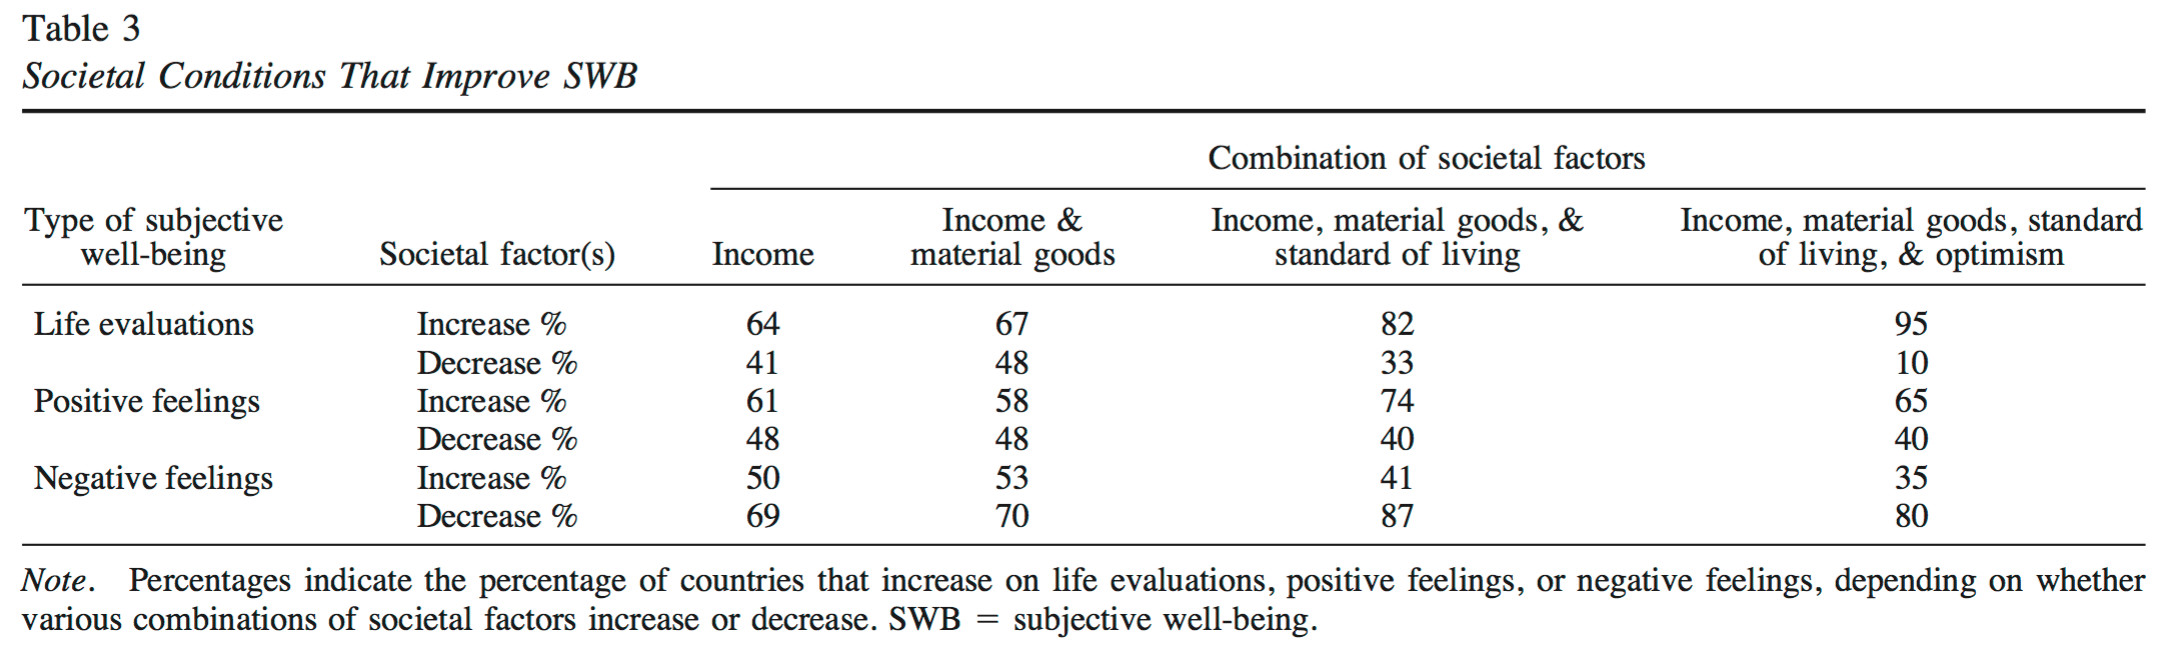 Source: Diener, Tay and Oishi (2013). Rising income and the Subjective Well-Being of nations. Journal of Personality and Social Psychology, 104(2): 267-276. From: https://www.apa.org/pubs/journals/releases/psp-104-2-267.pdf